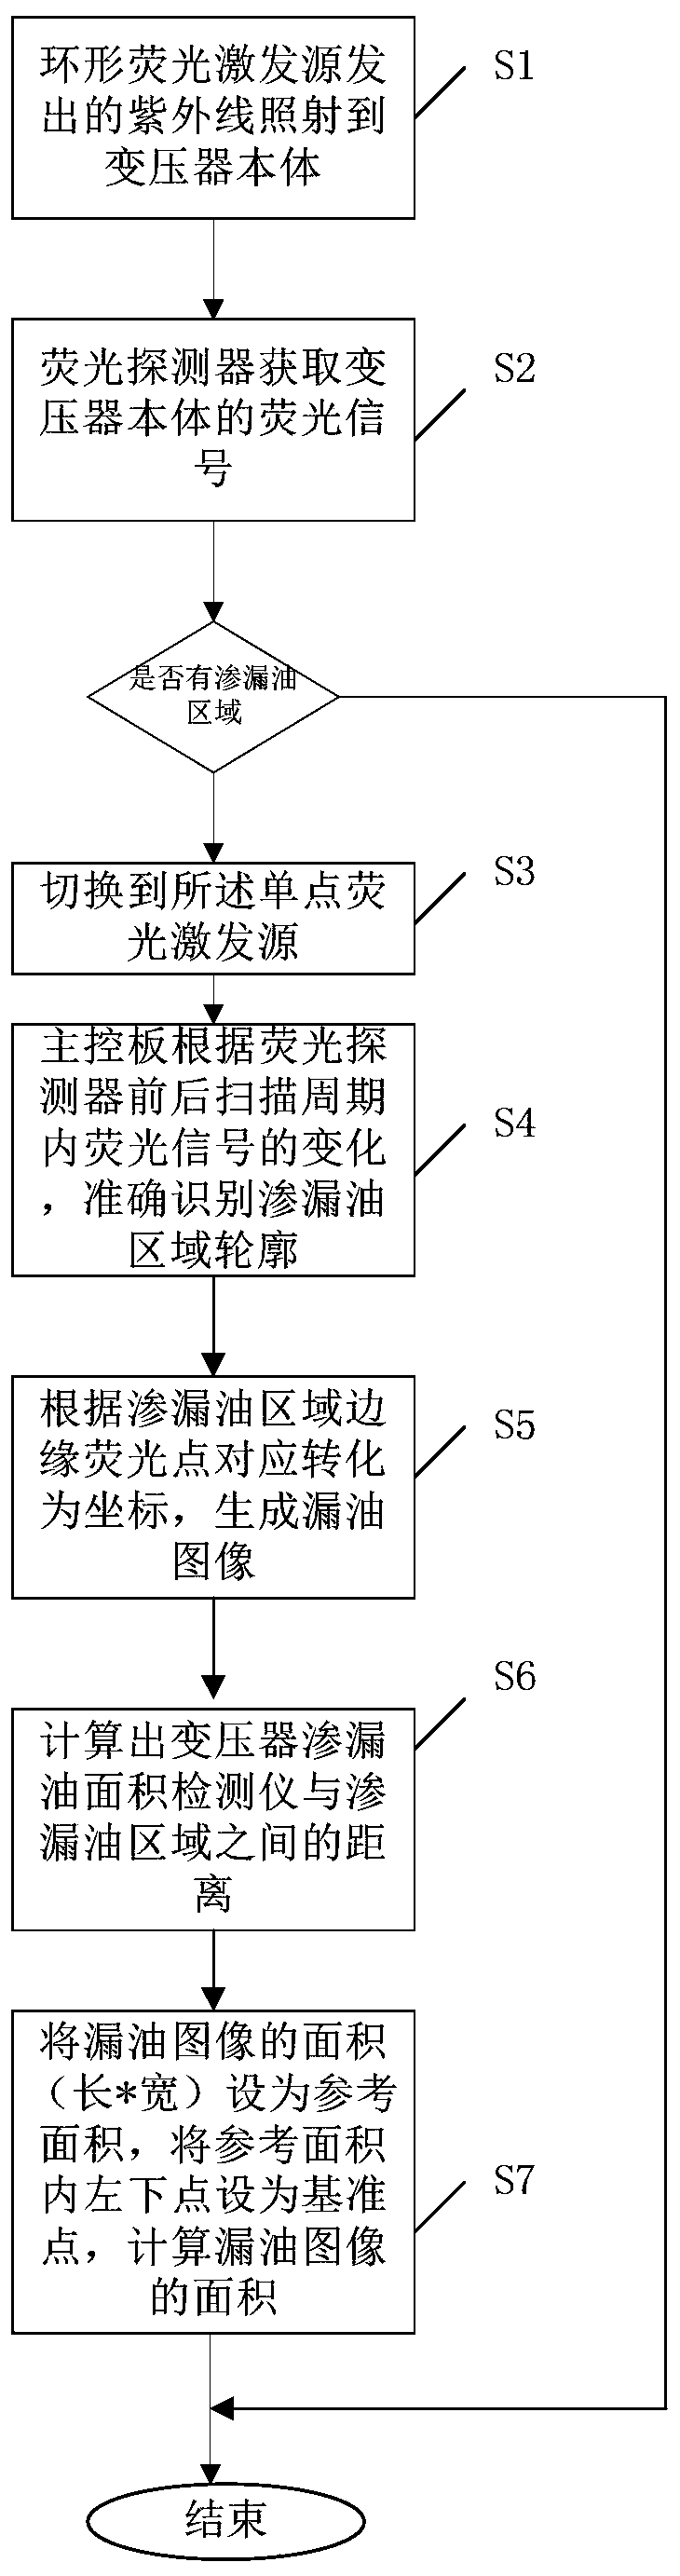 Transformer body oil leakage area detection system and method